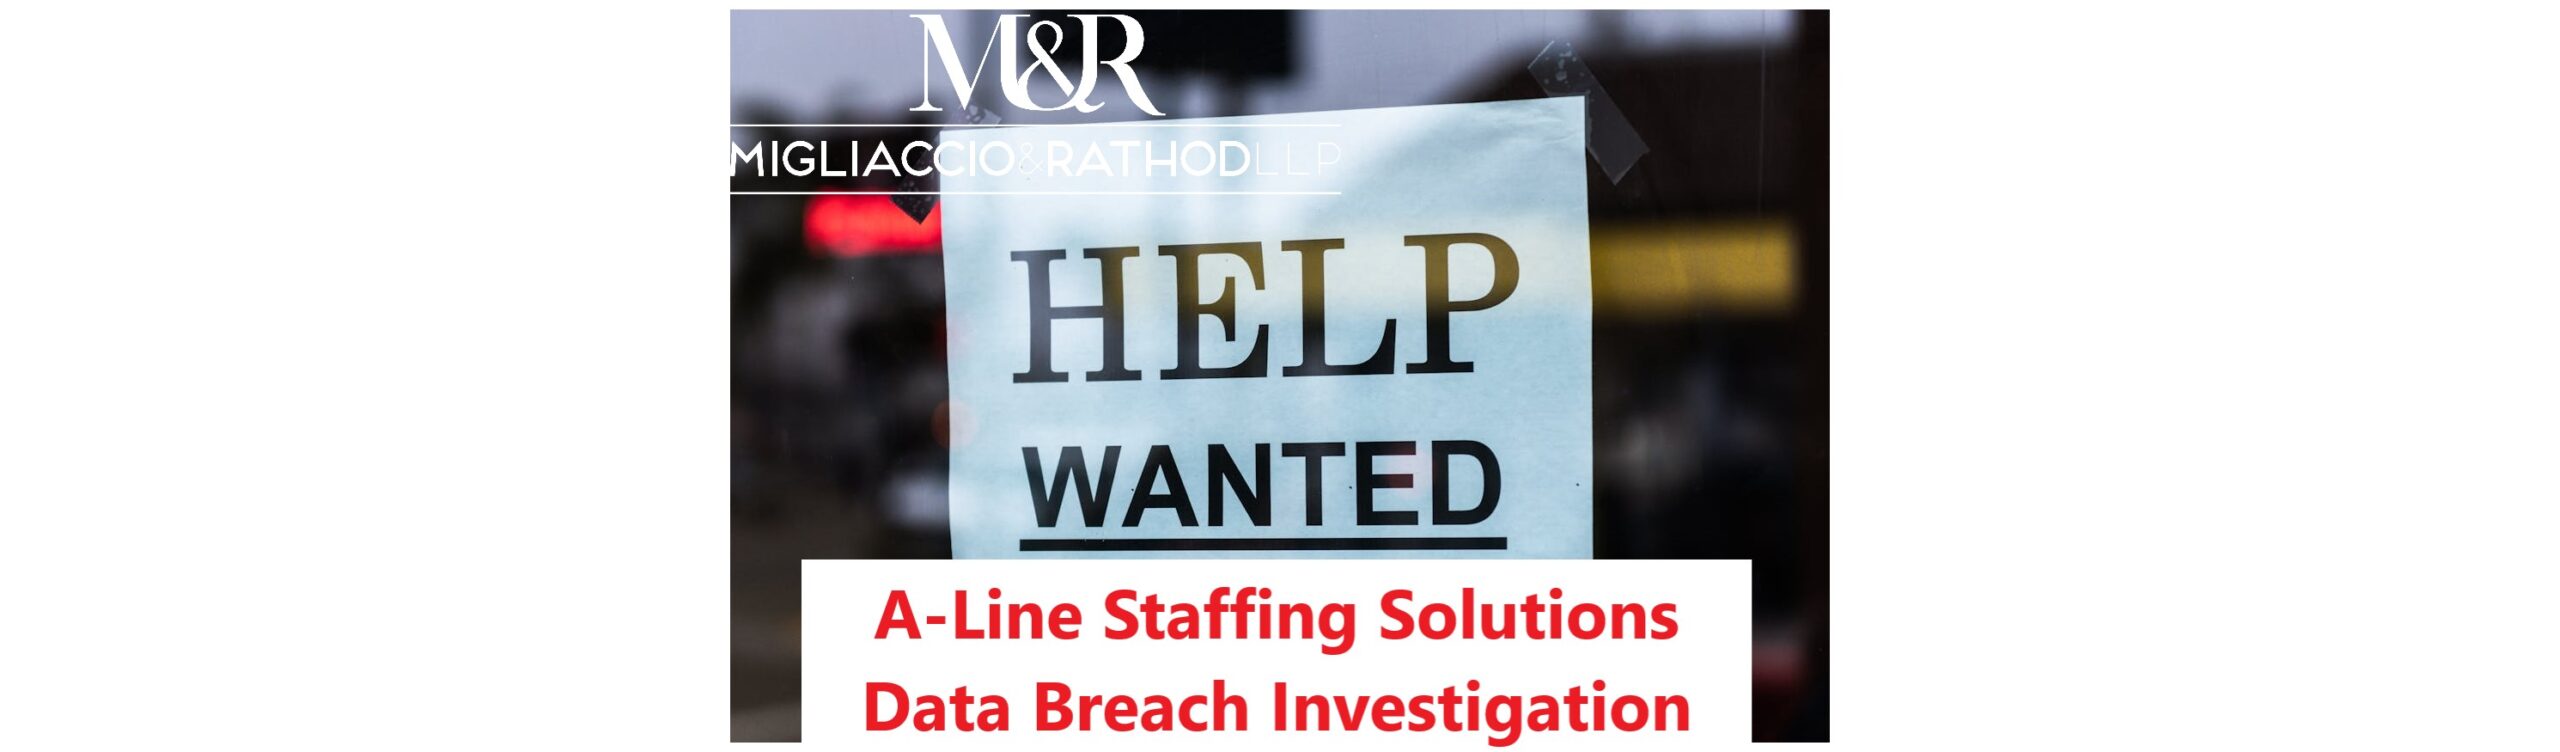 A-Line Staffing Solutions Data Breach Investigation